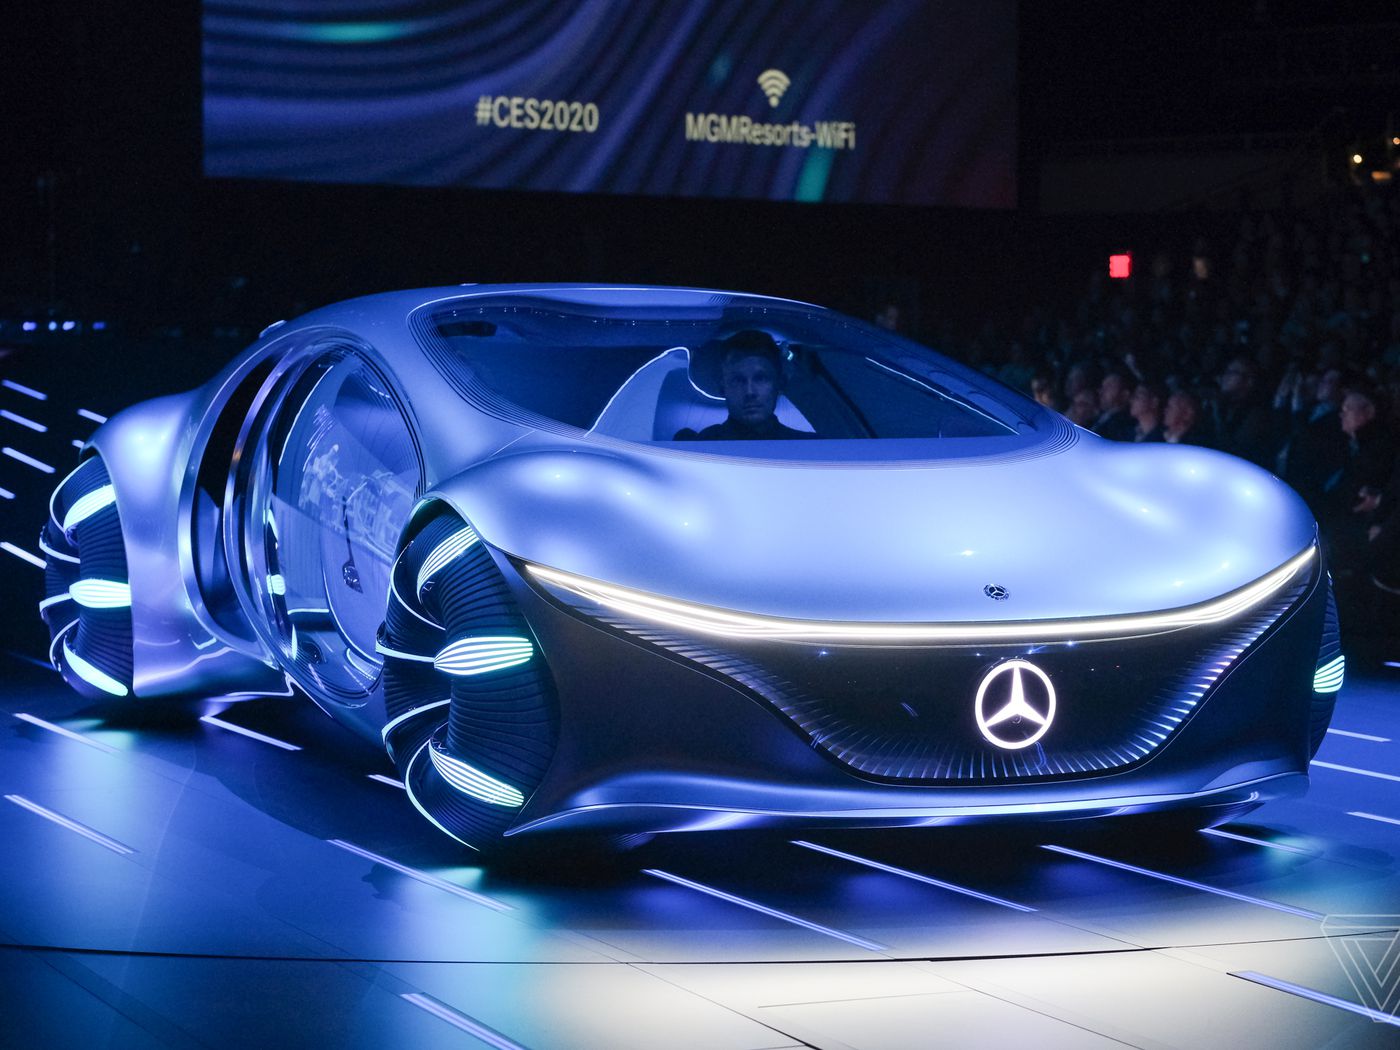 Mercedes Benz Unveils An Avatar Themed Concept Car With Scales The Verge